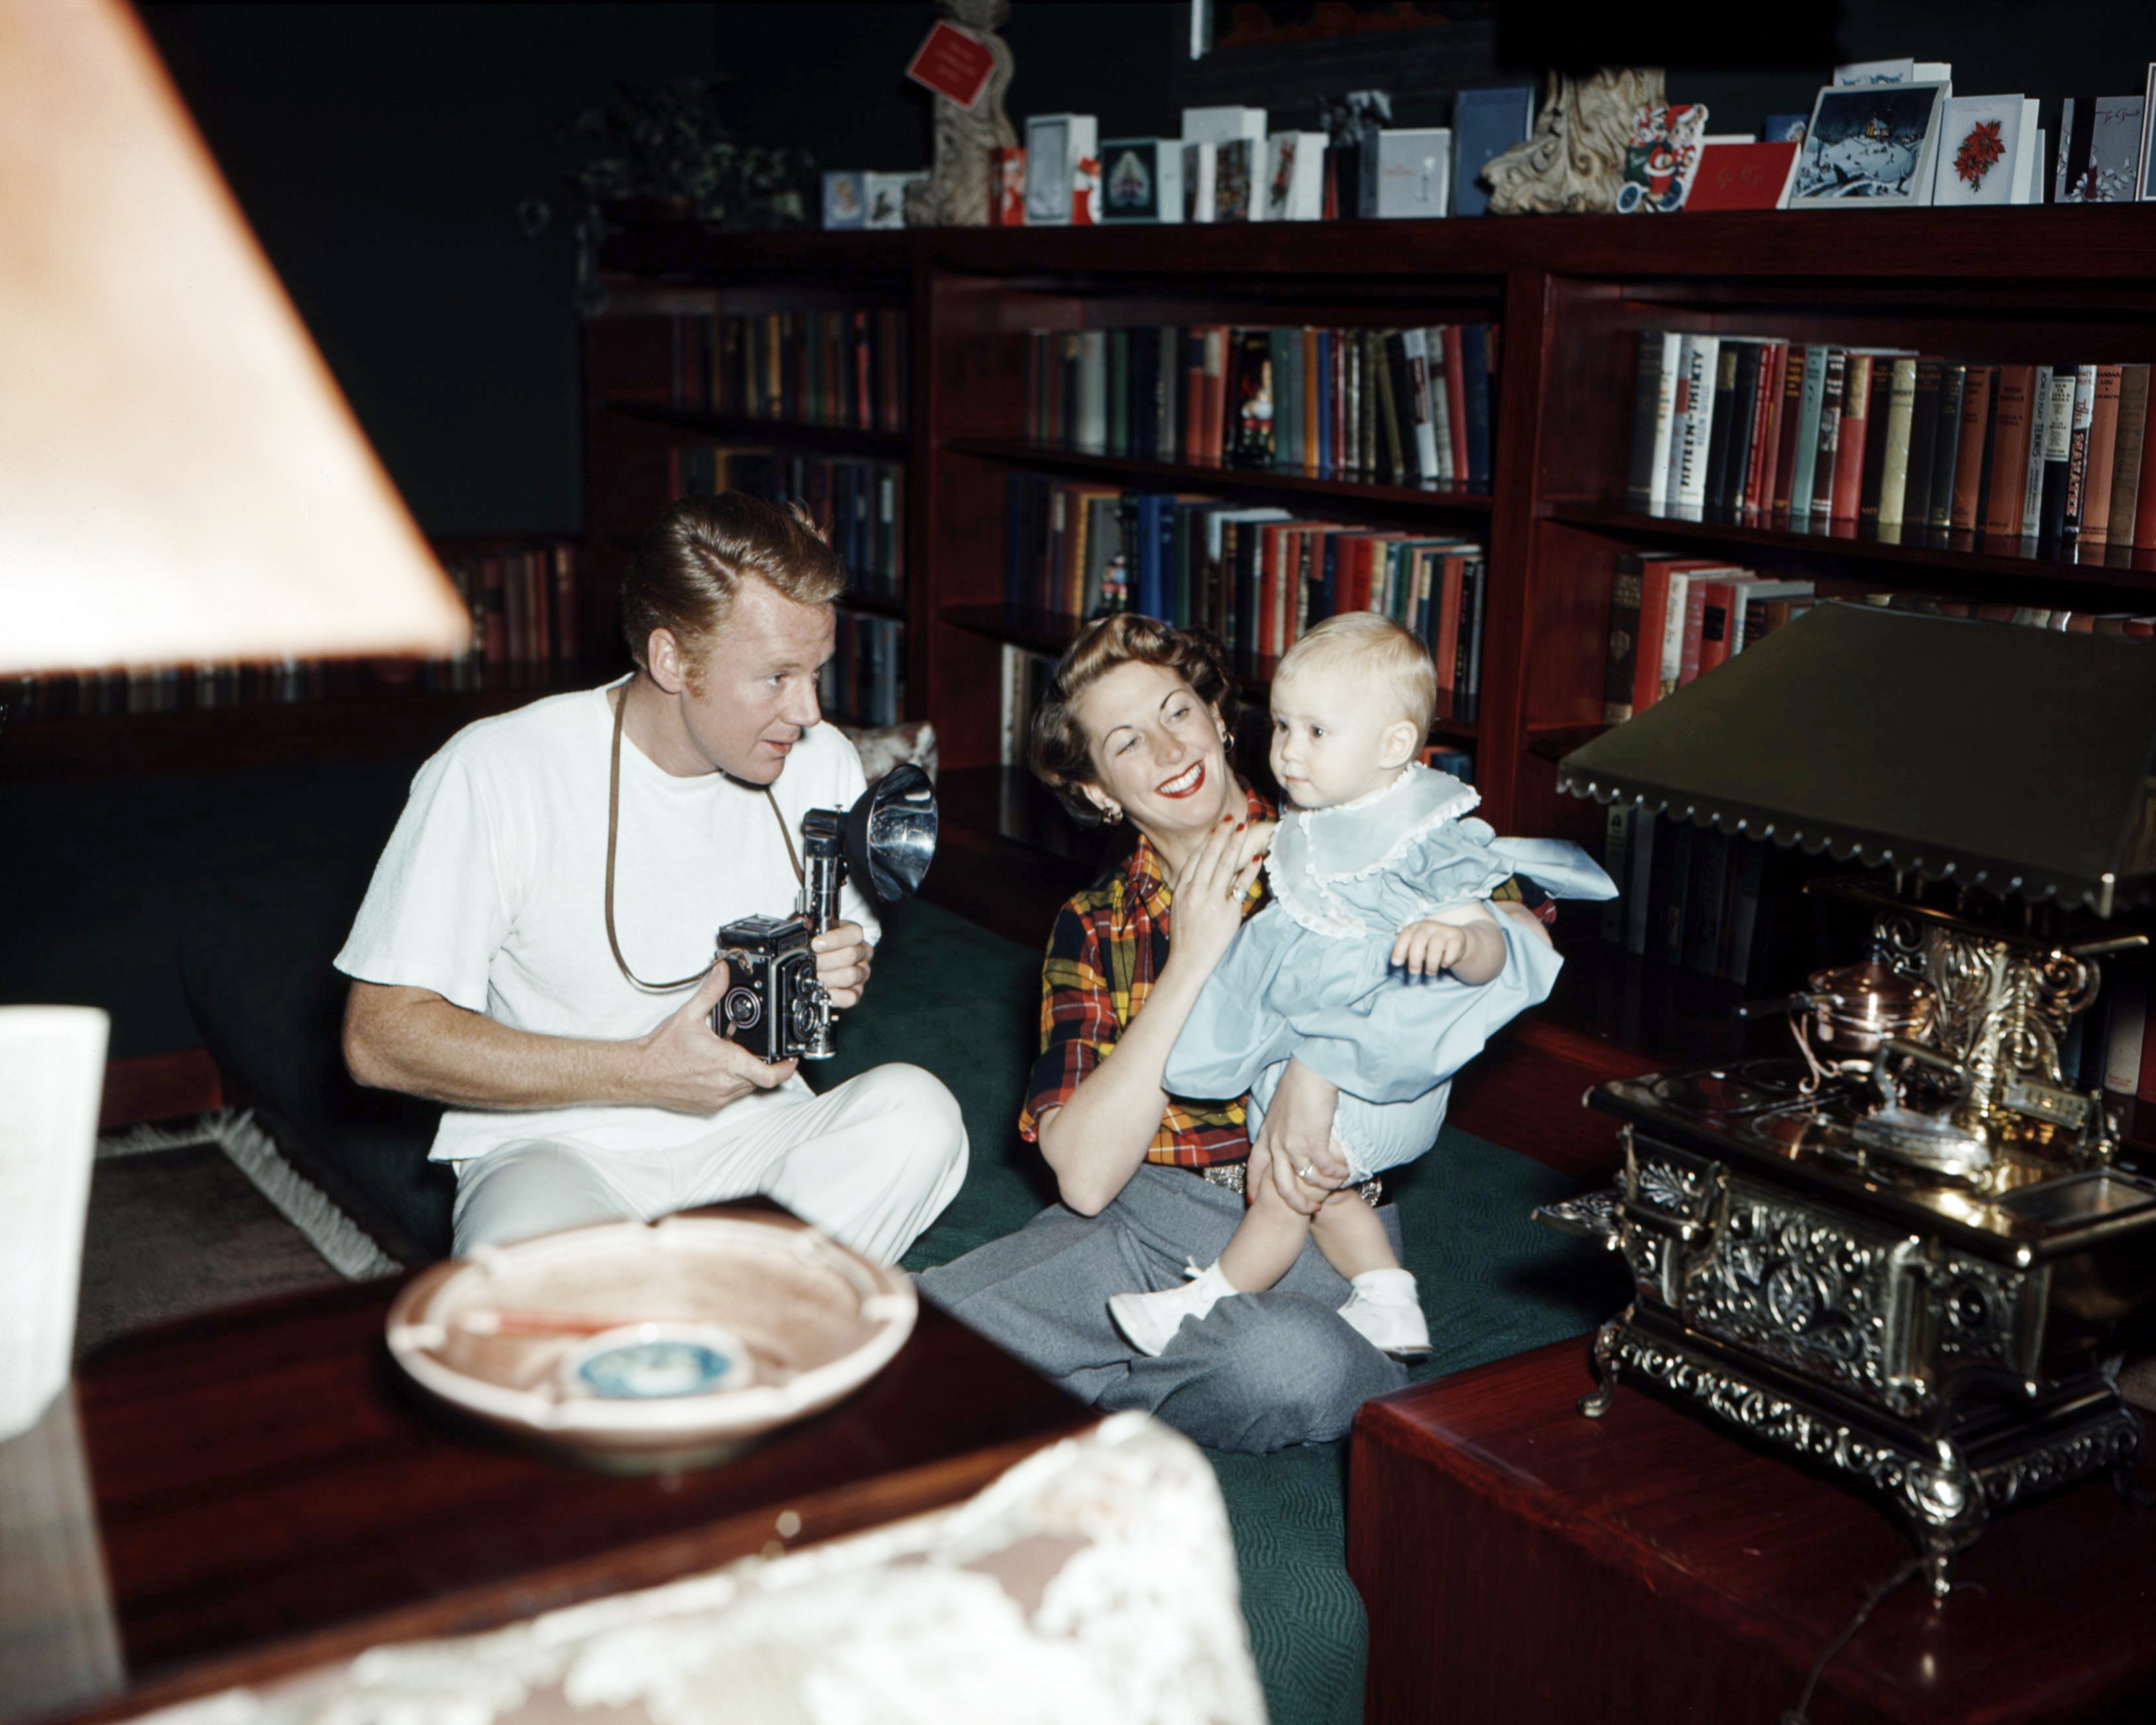 Van Johnson photographs his wife, Eve "Evie" Abbott, and their baby daughter Schuyler, circa 1949 | Source: Getty Images